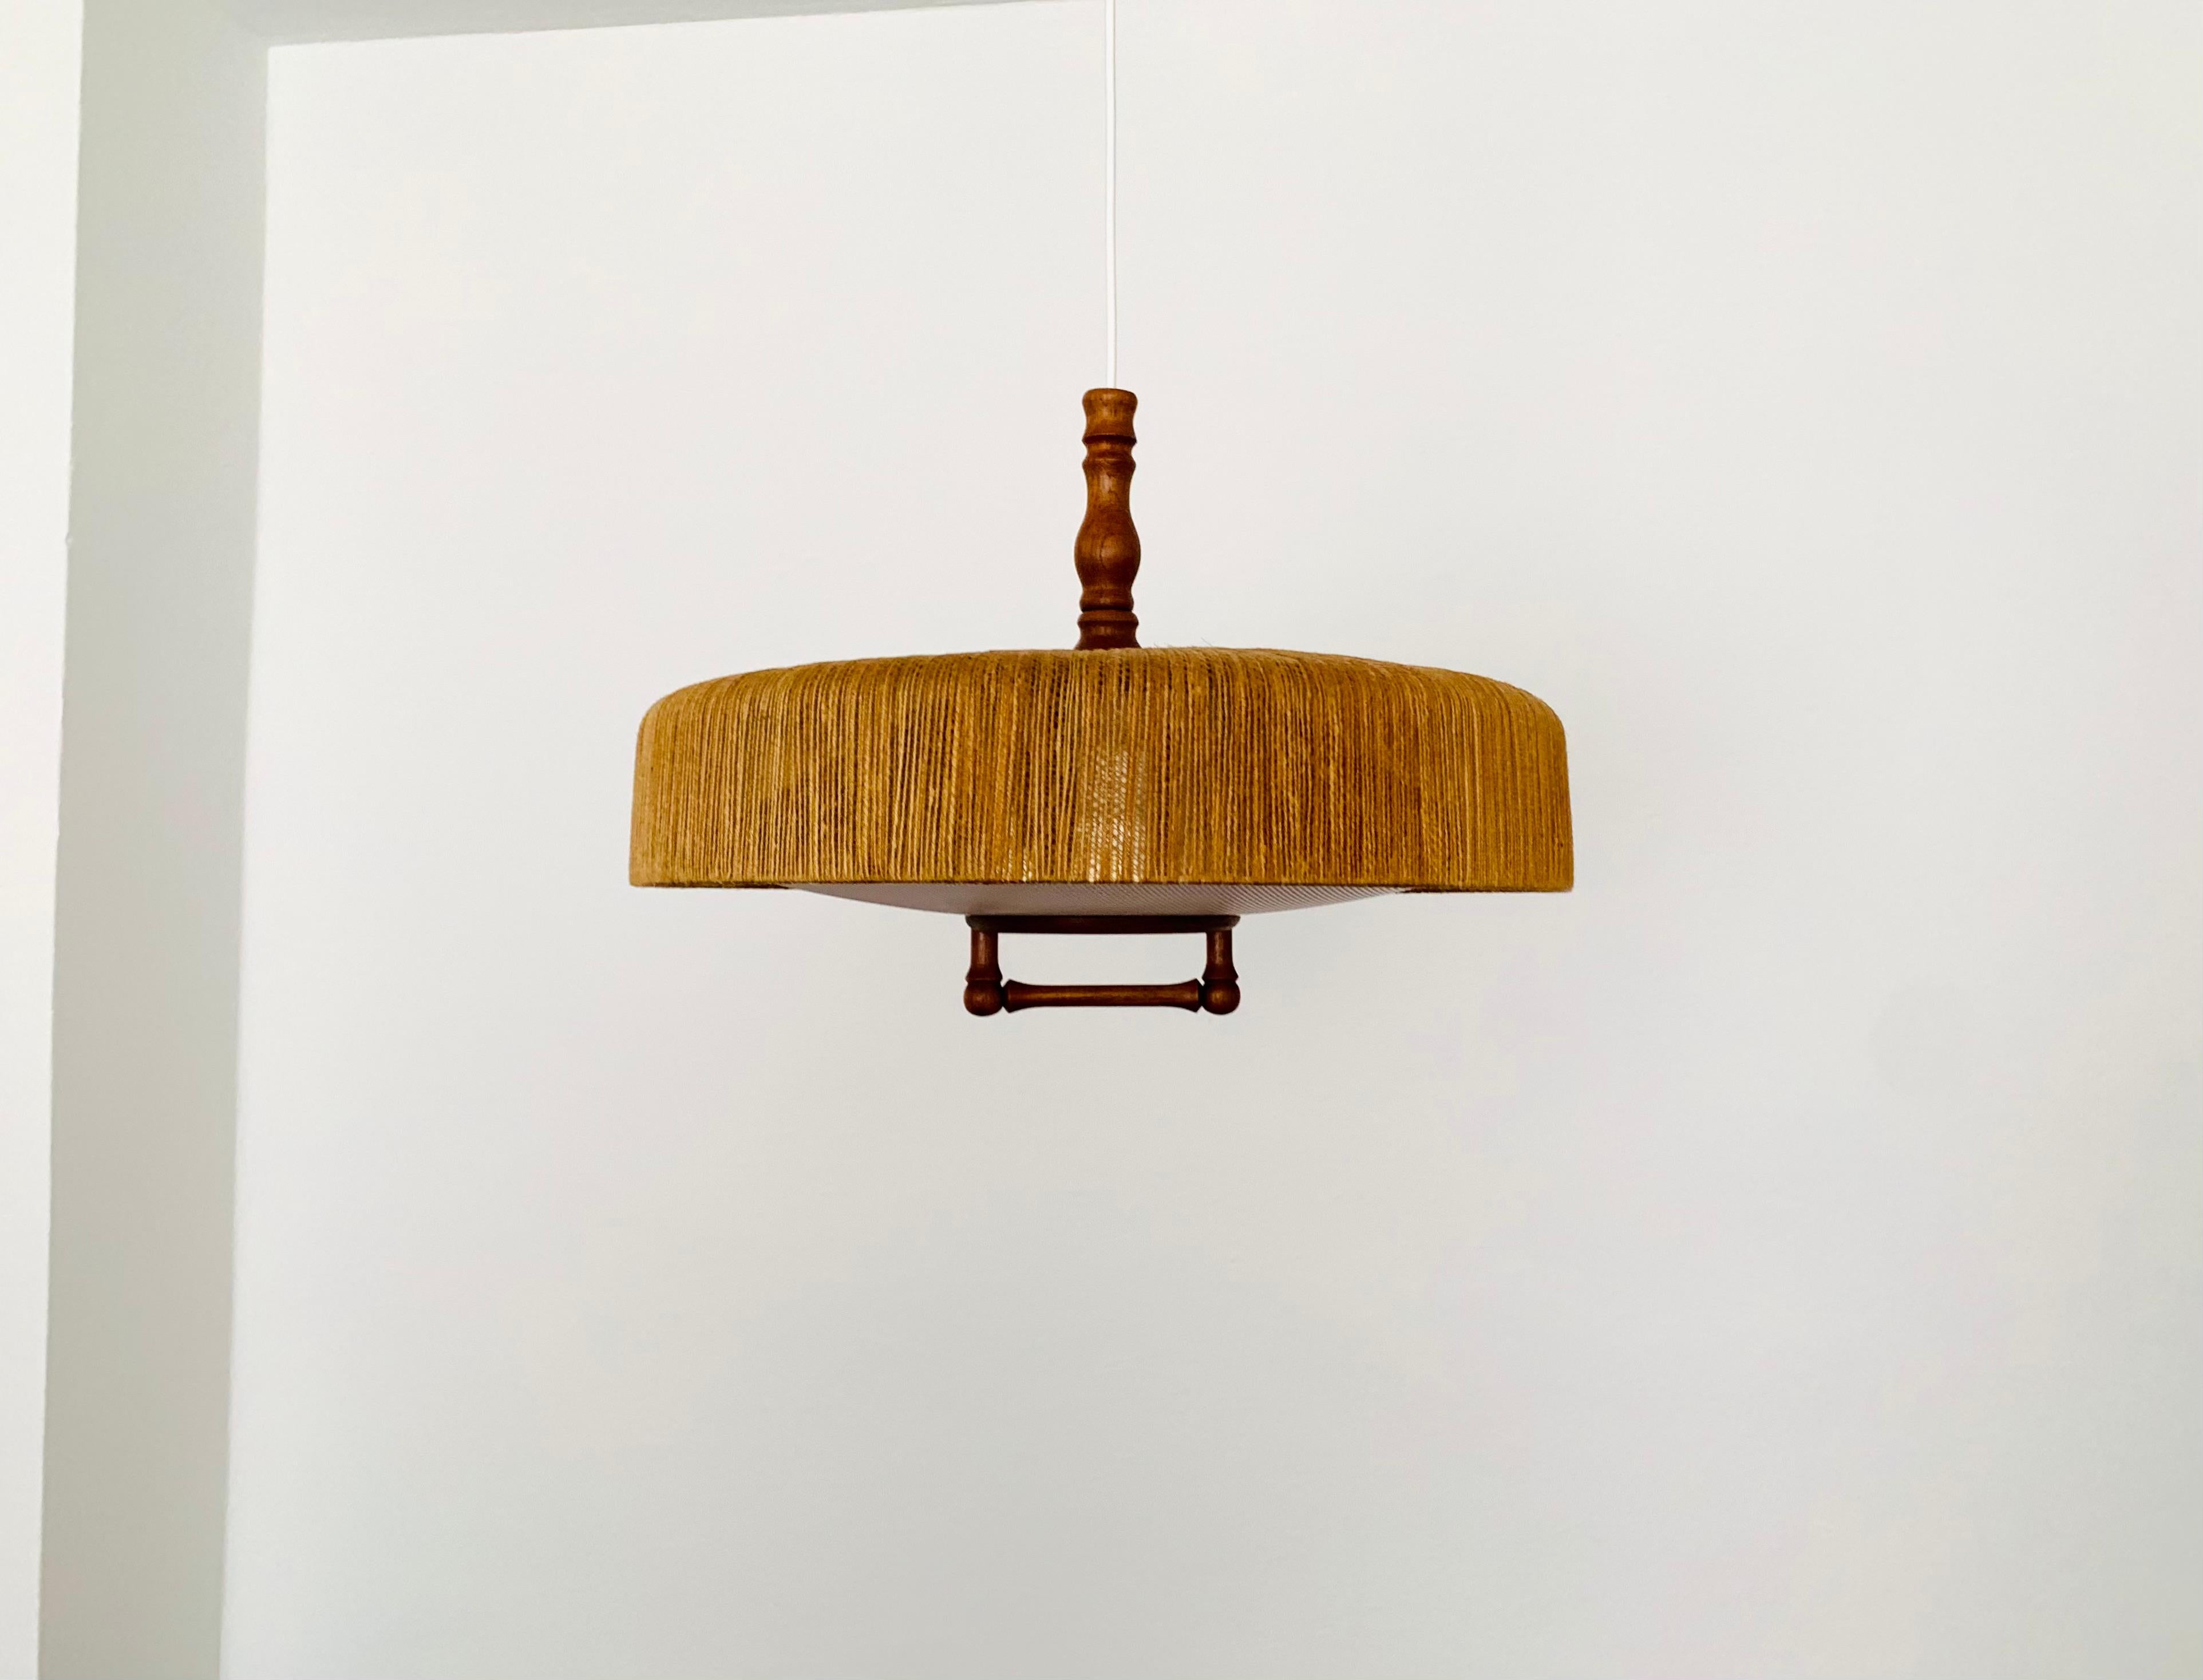 Exceptionally beautiful and large pendant lamp from the 1960s.
The design is very unusual.
The shape and the materials create a warm and very pleasant light.
The teak details are beautifully shaped.

Condition:

Very good vintage condition with